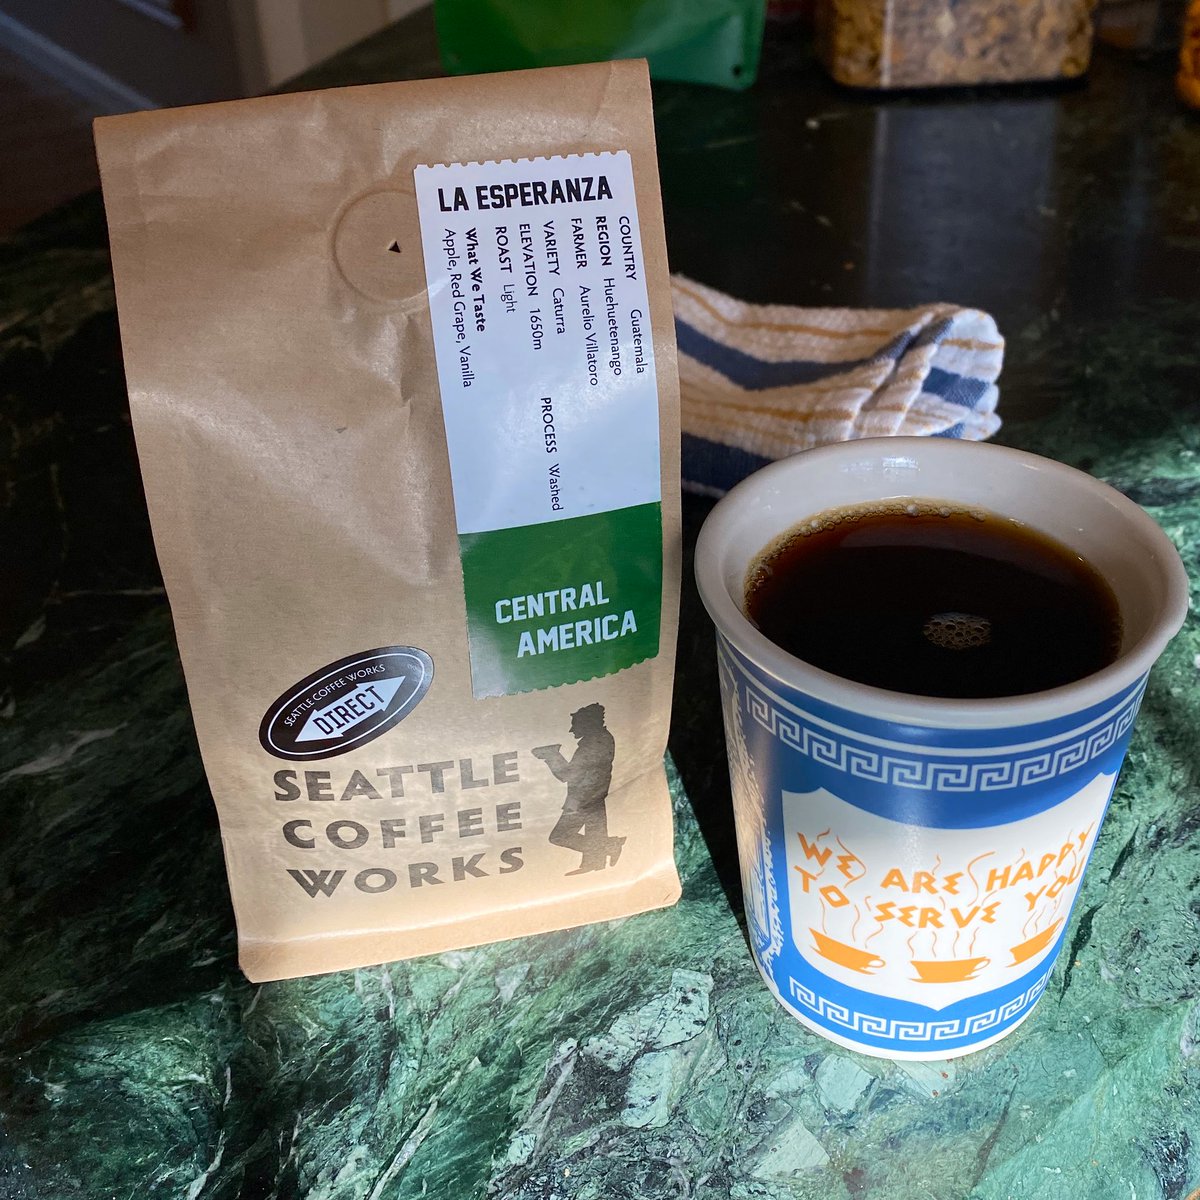 Seattle Coffee Works La EsperanzaThe fine folks at Seattle Coffee Works deliver another absolutely delicious brew. This light roast from Guatemala has some seriously flavorful fruity notes. The vanilla hits on the finish to complete a really wonderful sip.